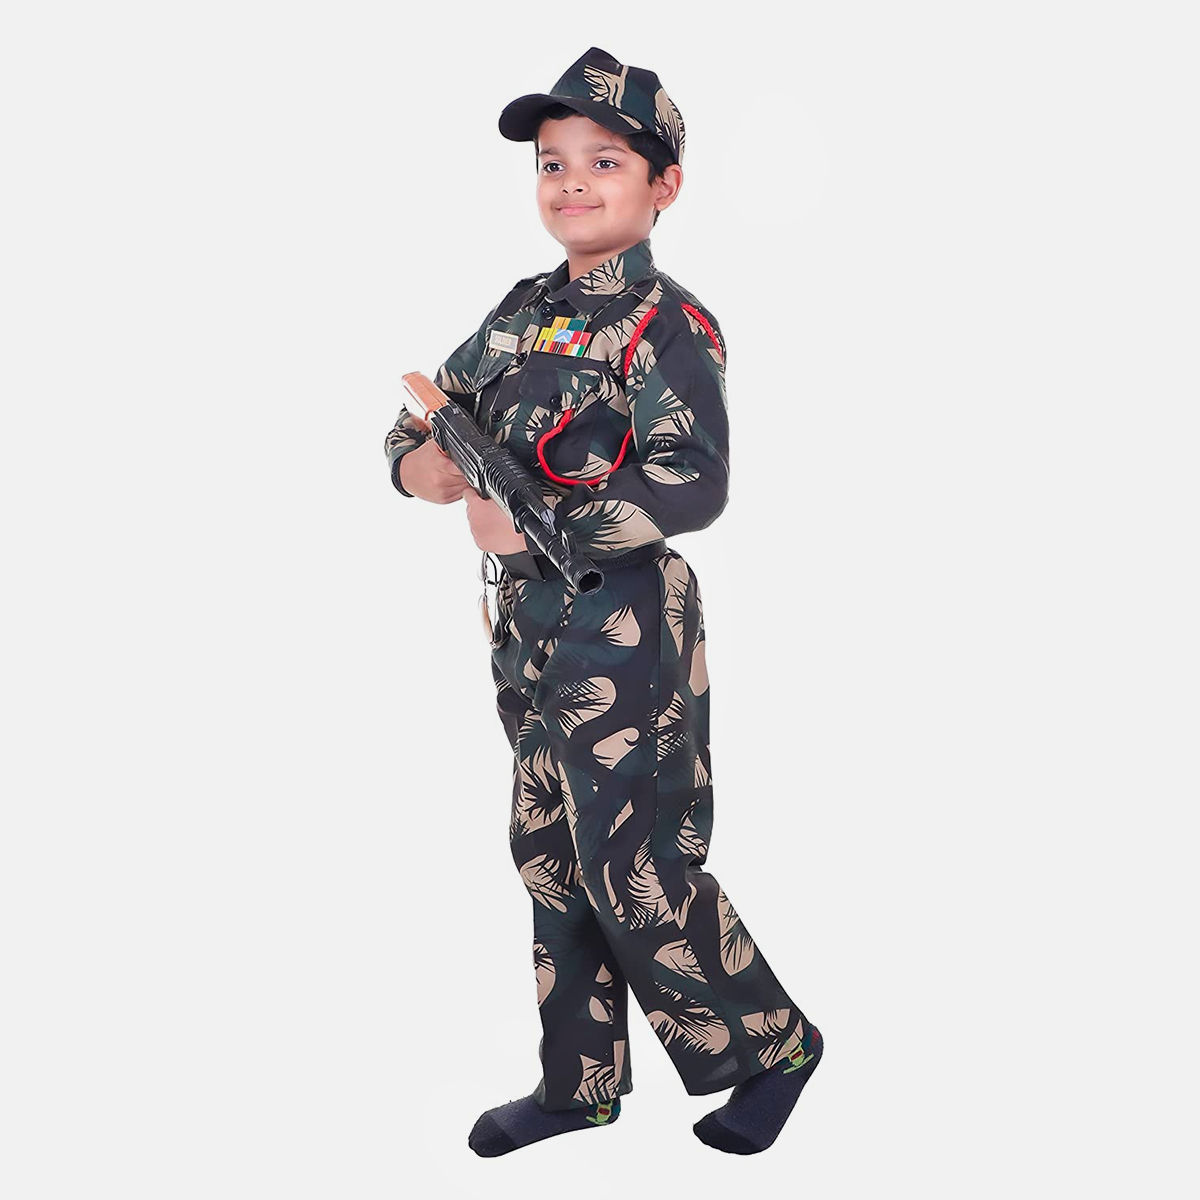 Army Dress for Kids, Polyester Fabric with Jungle Print for Patriotic Cosplay, 7Pc Set with Cap